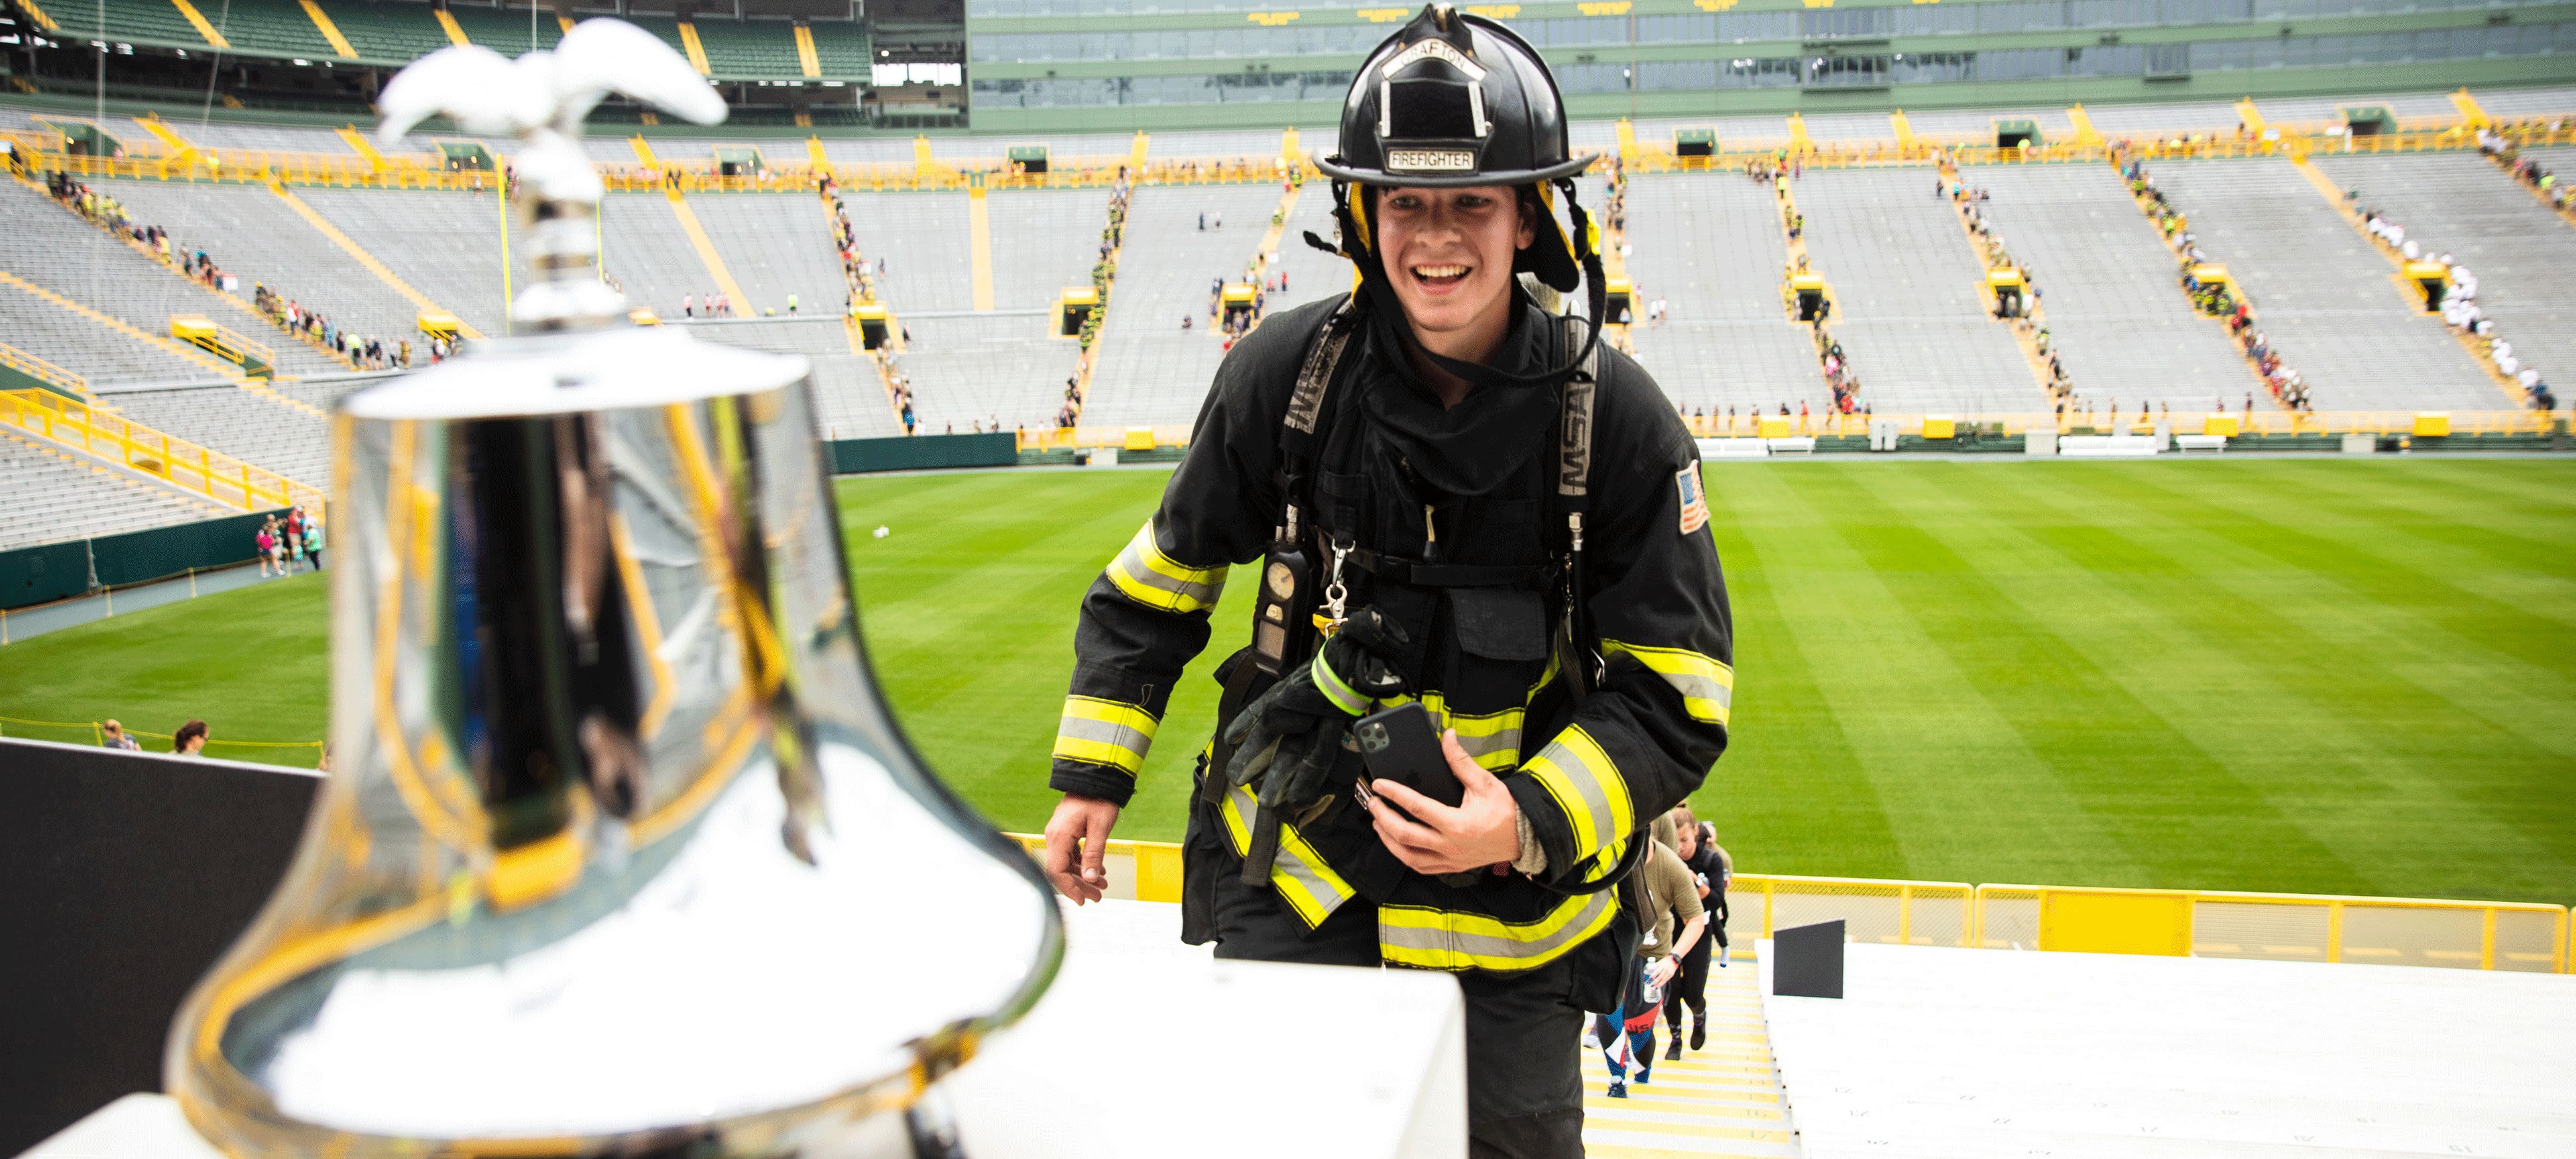 9/11 Memorial Stair Climb firefighter approaching bell to ring in Lambeau Field